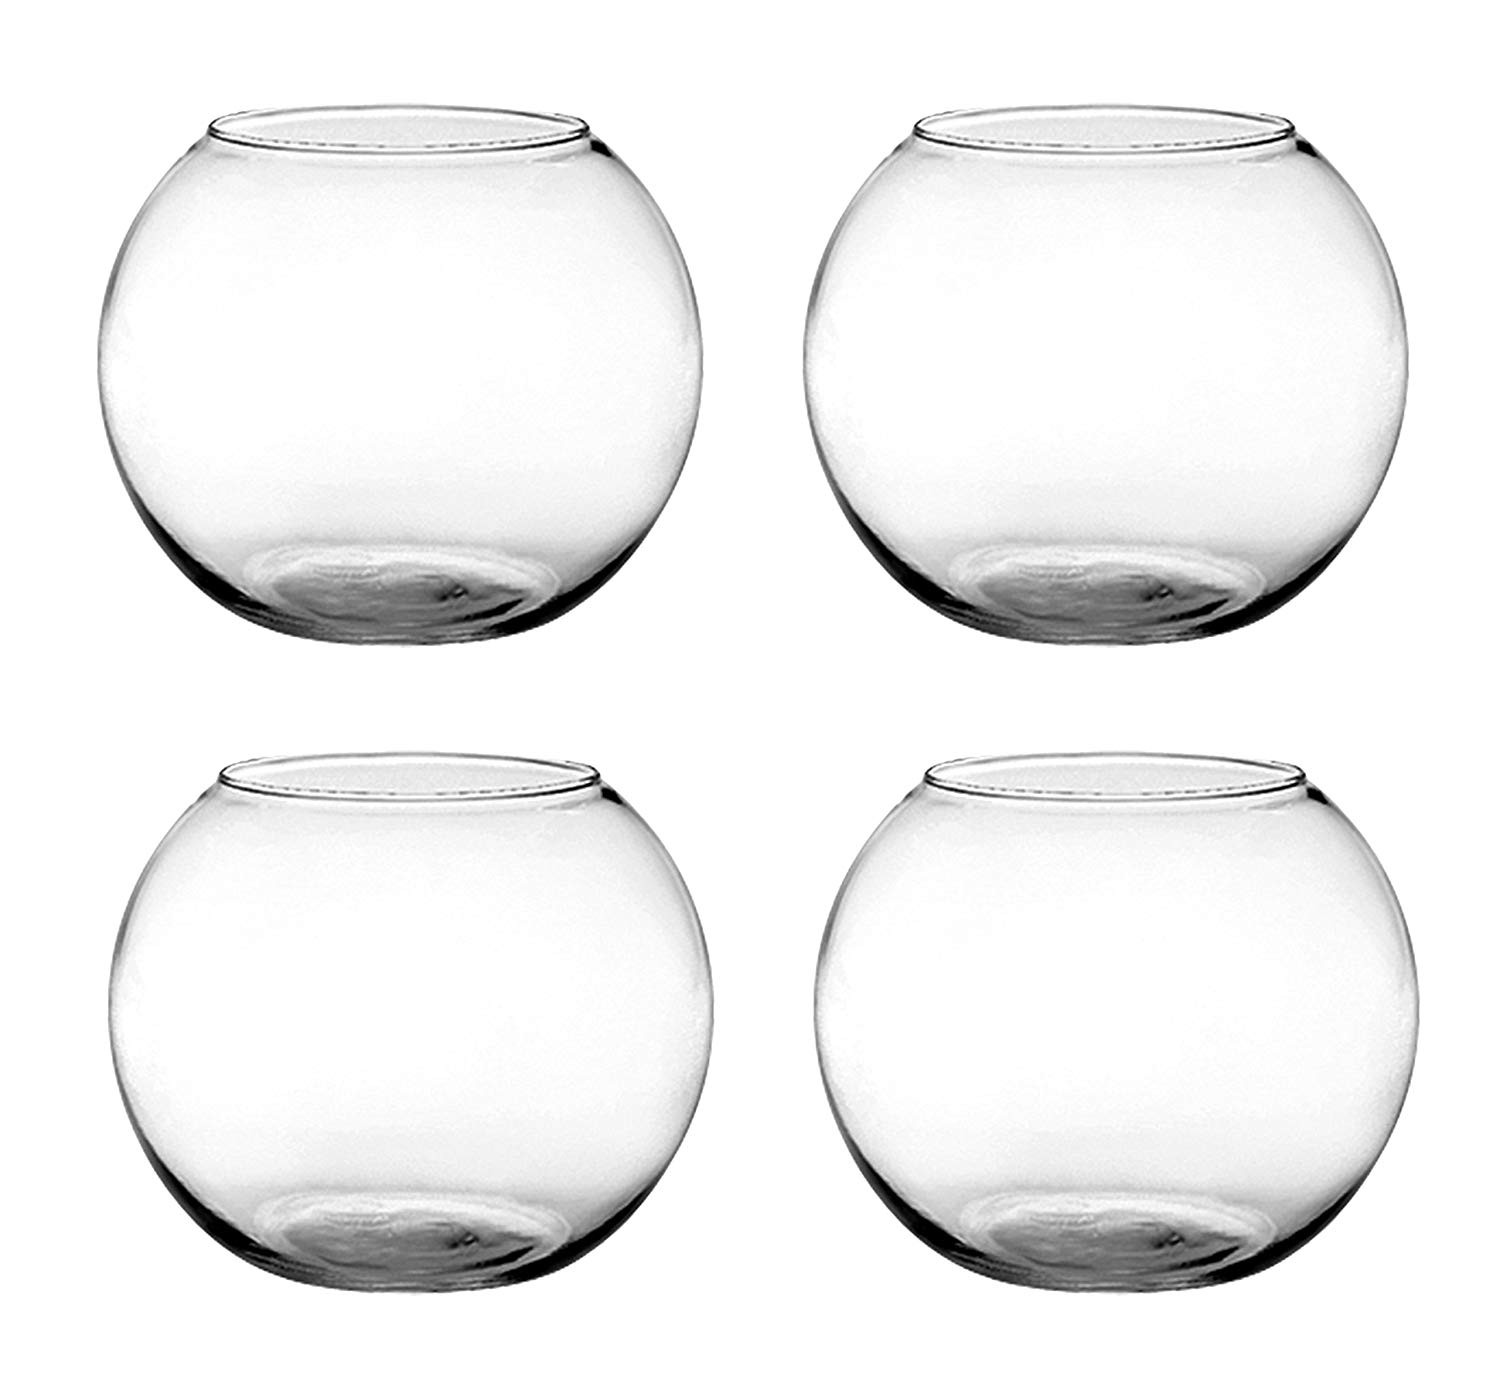 24 Amazing 16 Glass Cylinder Vase 2024 free download 16 glass cylinder vase of amazon com set of 4 syndicate sales 6 inches clear rose bowl pertaining to amazon com set of 4 syndicate sales 6 inches clear rose bowl bundled by maven gifts garde